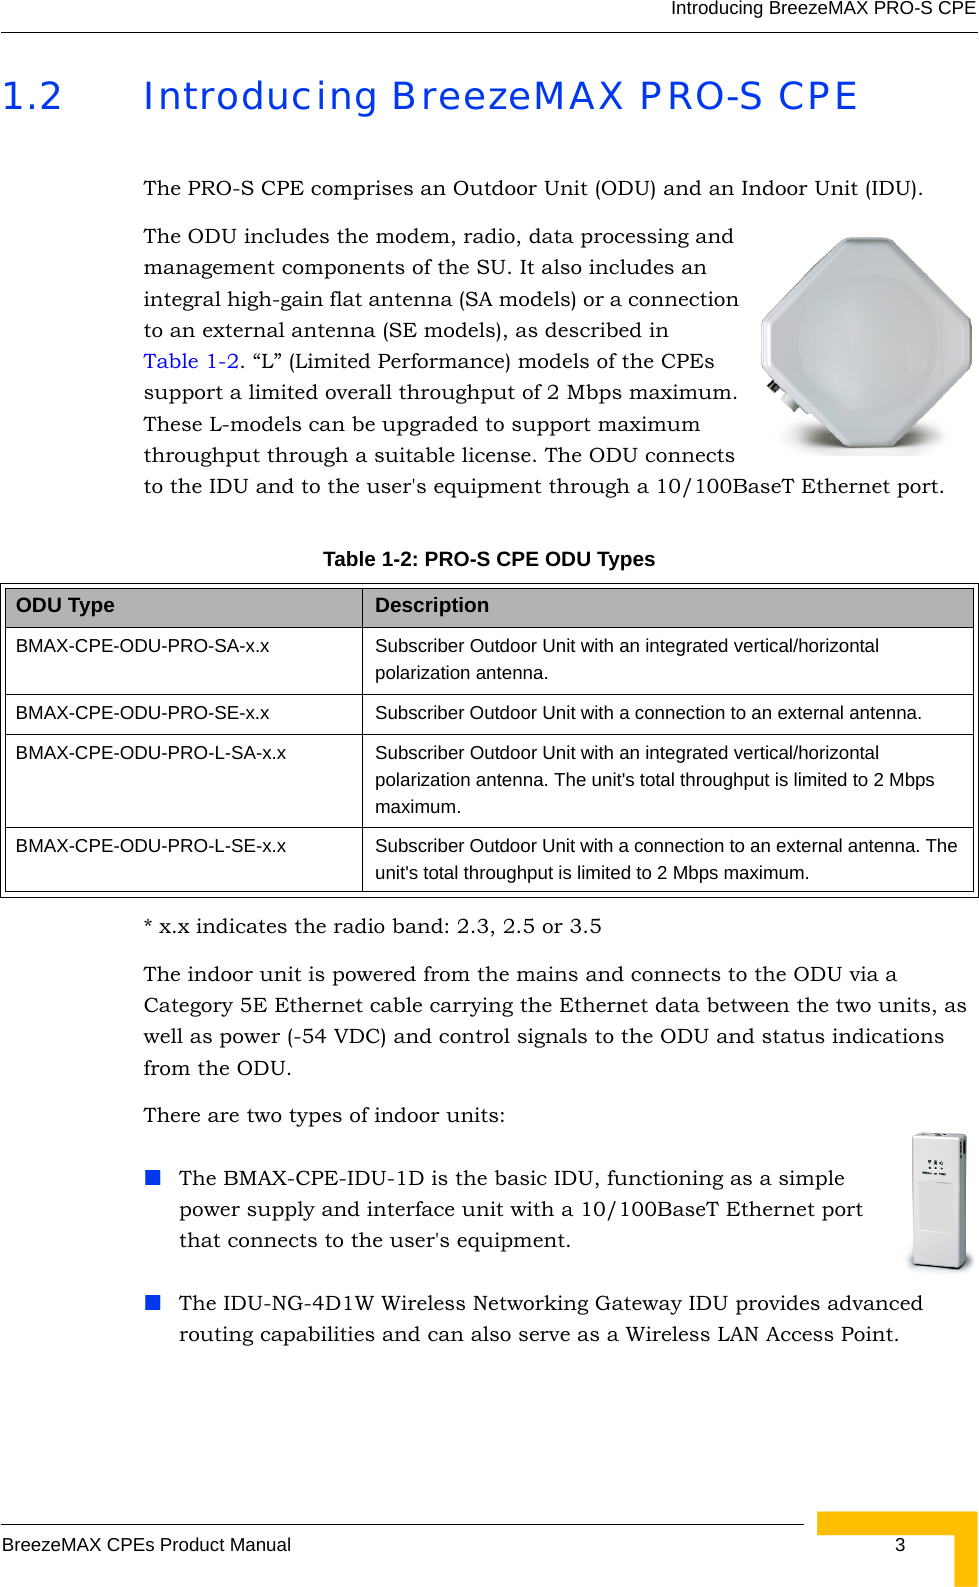 Introducing BreezeMAX PRO-S CPEBreezeMAX CPEs Product Manual 31.2 Introducing BreezeMAX PRO-S CPEThe PRO-S CPE comprises an Outdoor Unit (ODU) and an Indoor Unit (IDU).The ODU includes the modem, radio, data processing and management components of the SU. It also includes an integral high-gain flat antenna (SA models) or a connection to an external antenna (SE models), as described in Table 1-2. “L” (Limited Performance) models of the CPEs support a limited overall throughput of 2 Mbps maximum. These L-models can be upgraded to support maximum throughput through a suitable license. The ODU connects to the IDU and to the user&apos;s equipment through a 10/100BaseT Ethernet port.* x.x indicates the radio band: 2.3, 2.5 or 3.5The indoor unit is powered from the mains and connects to the ODU via a Category 5E Ethernet cable carrying the Ethernet data between the two units, as well as power (-54 VDC) and control signals to the ODU and status indications from the ODU. There are two types of indoor units:The BMAX-CPE-IDU-1D is the basic IDU, functioning as a simple power supply and interface unit with a 10/100BaseT Ethernet port that connects to the user&apos;s equipment. The IDU-NG-4D1W Wireless Networking Gateway IDU provides advanced routing capabilities and can also serve as a Wireless LAN Access Point.Table 1-2: PRO-S CPE ODU Types ODU Type DescriptionBMAX-CPE-ODU-PRO-SA-x.x Subscriber Outdoor Unit with an integrated vertical/horizontal polarization antenna. BMAX-CPE-ODU-PRO-SE-x.x Subscriber Outdoor Unit with a connection to an external antenna. BMAX-CPE-ODU-PRO-L-SA-x.x Subscriber Outdoor Unit with an integrated vertical/horizontal polarization antenna. The unit&apos;s total throughput is limited to 2 Mbps maximum.BMAX-CPE-ODU-PRO-L-SE-x.x Subscriber Outdoor Unit with a connection to an external antenna. The unit&apos;s total throughput is limited to 2 Mbps maximum.